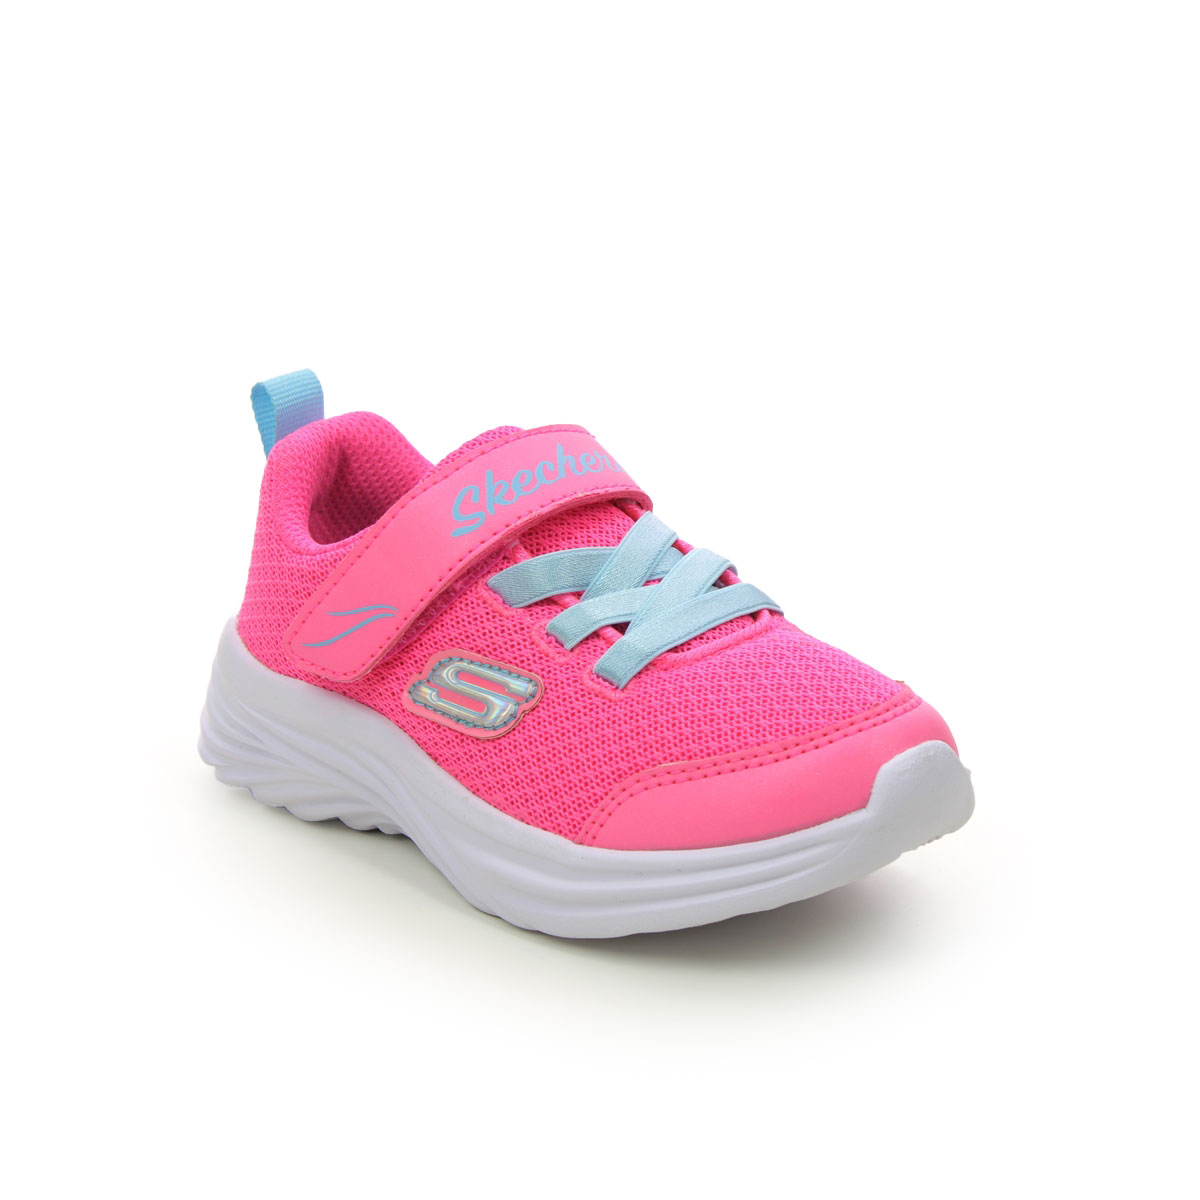 Skechers Dreamy Dancer Infant Pink Turquoise Kids Girls Trainers 302450N In Size 23 In Plain Pink Turquoise